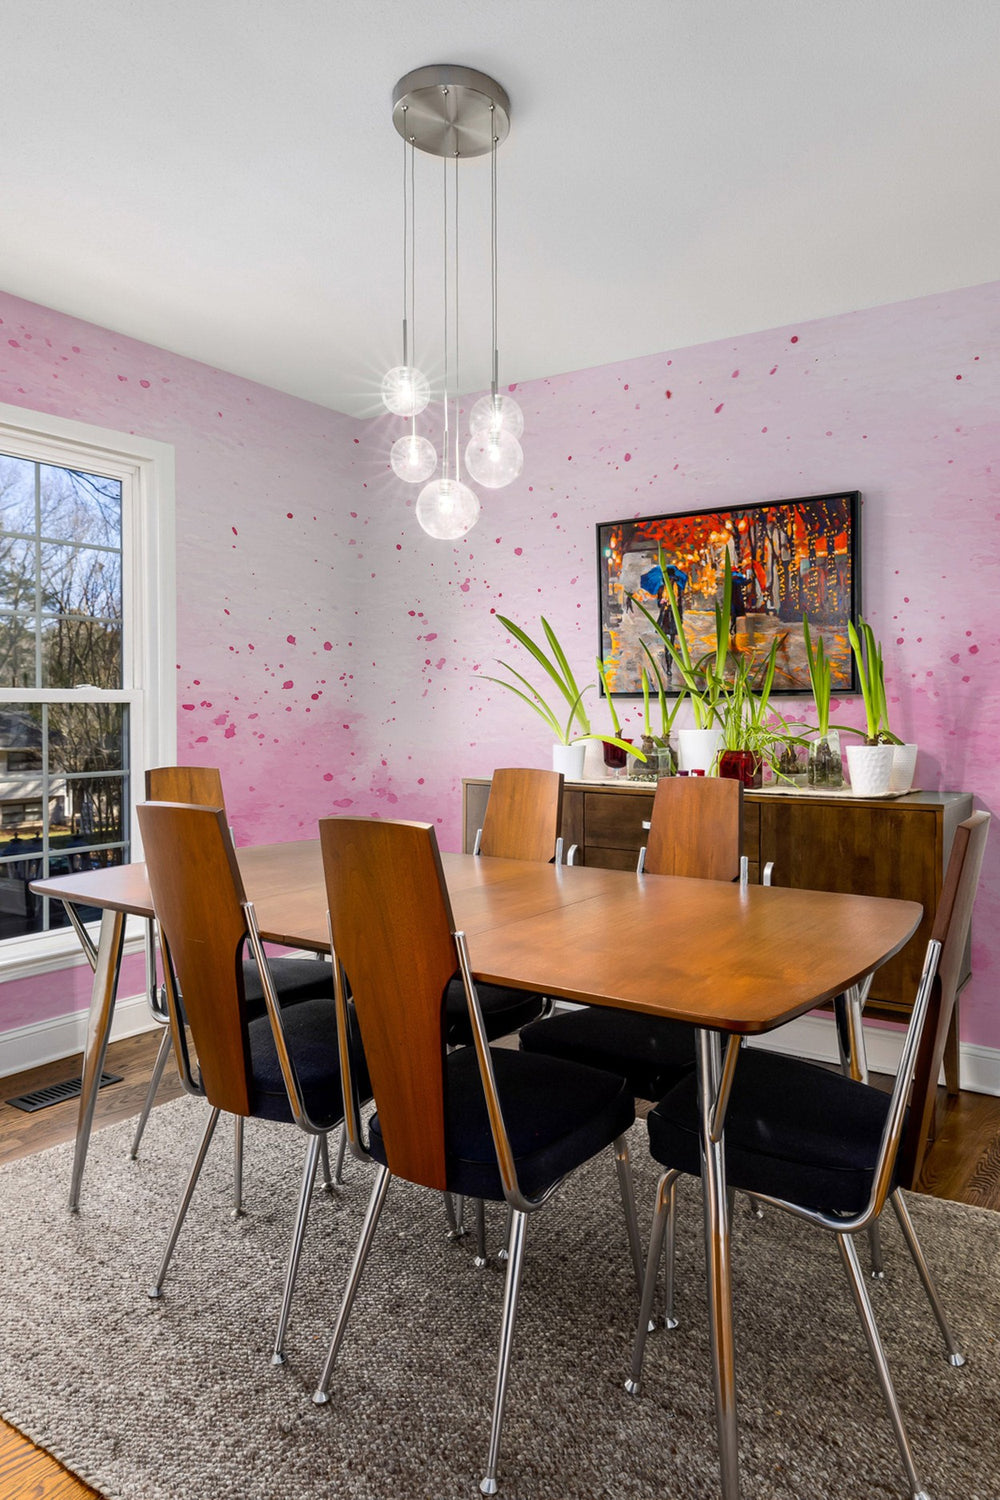 Stylish dining room with wooden table, mid-century modern chairs and an abstract wall mural with vibrant splashes of color